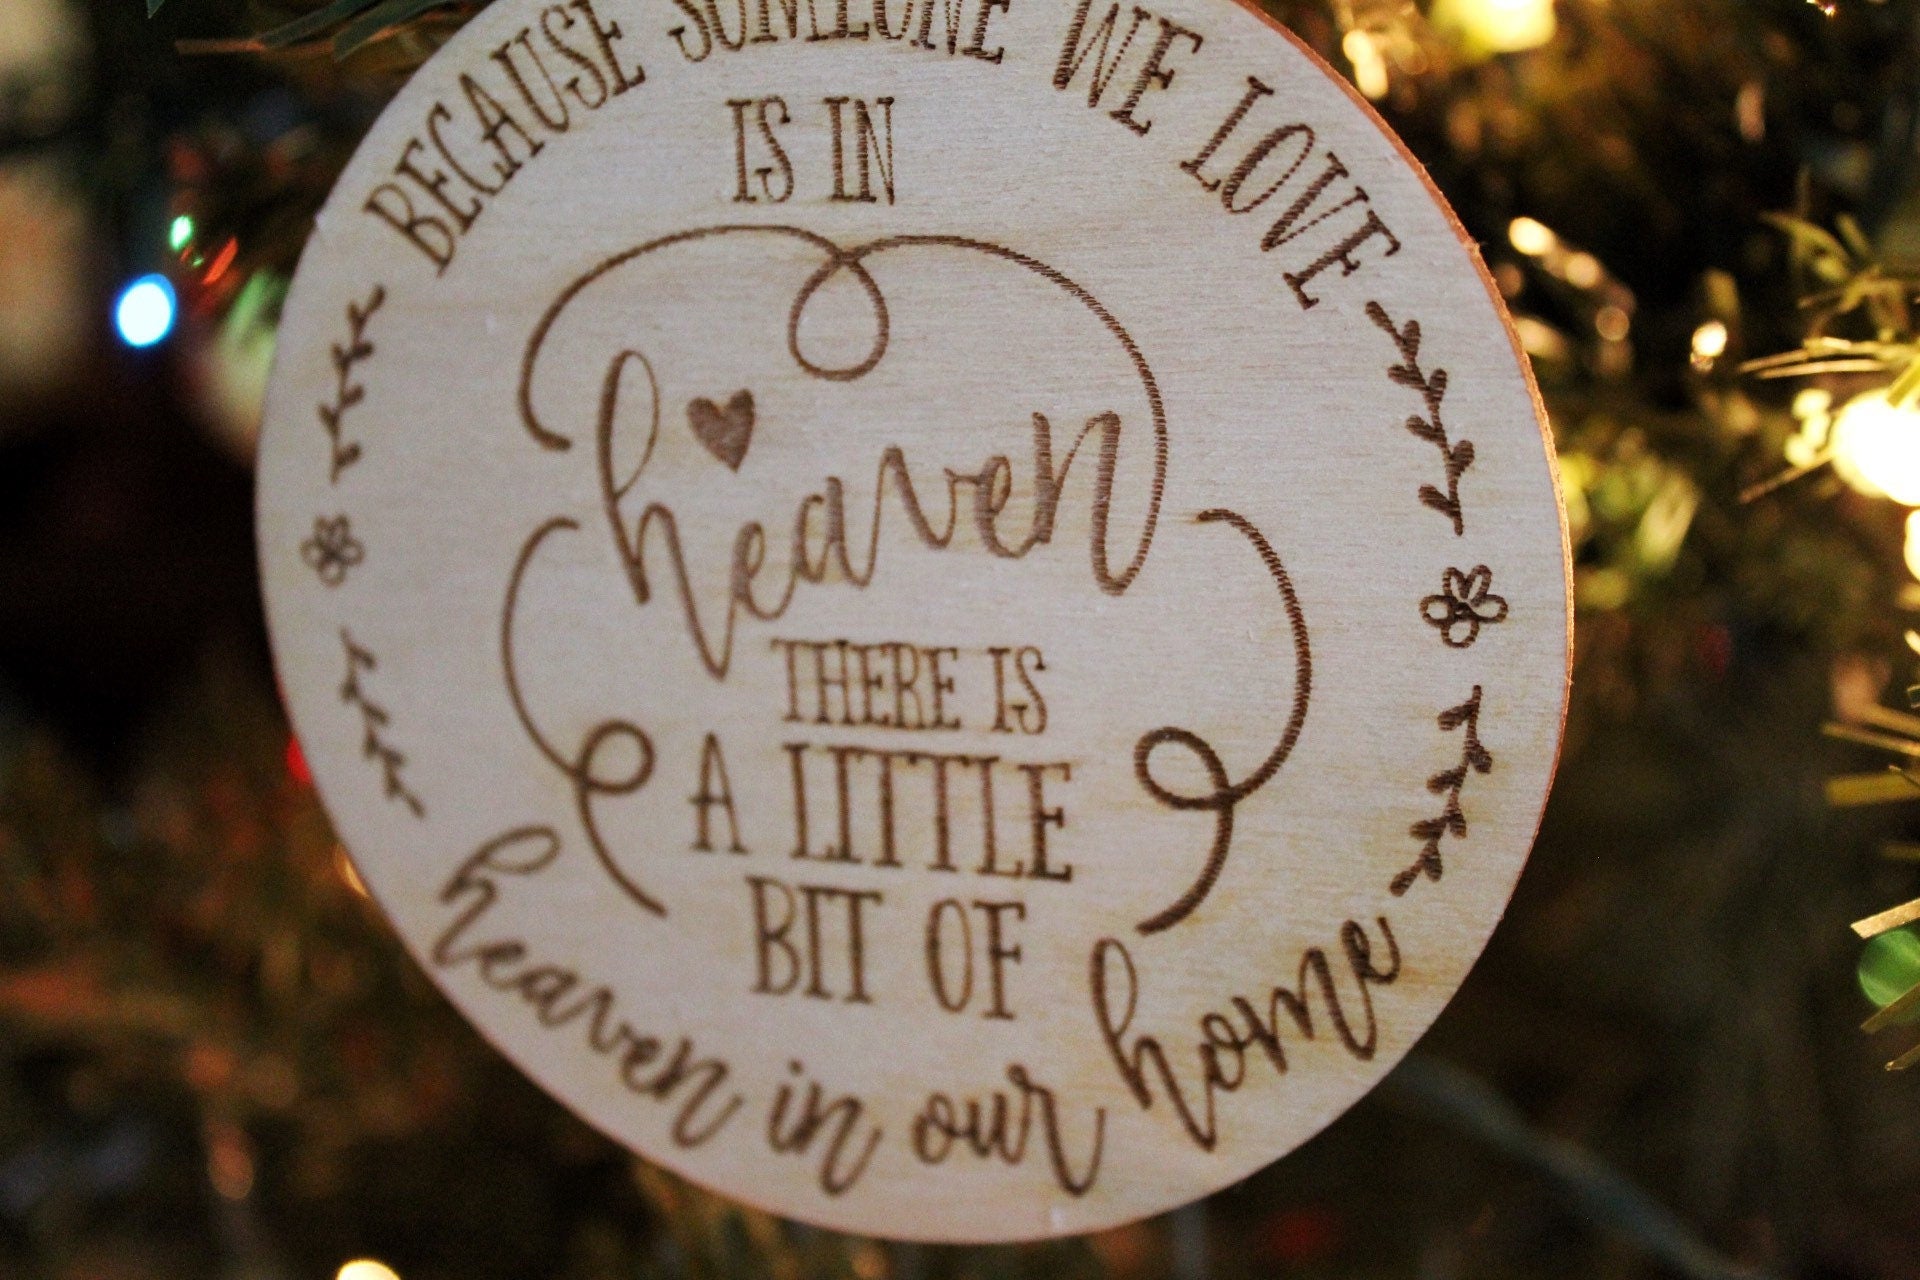 Because Someone We Love Is In Heaven There’s A Little Bit Of Heaven In Our Home Memorial Ornament Christmas Gift For Her